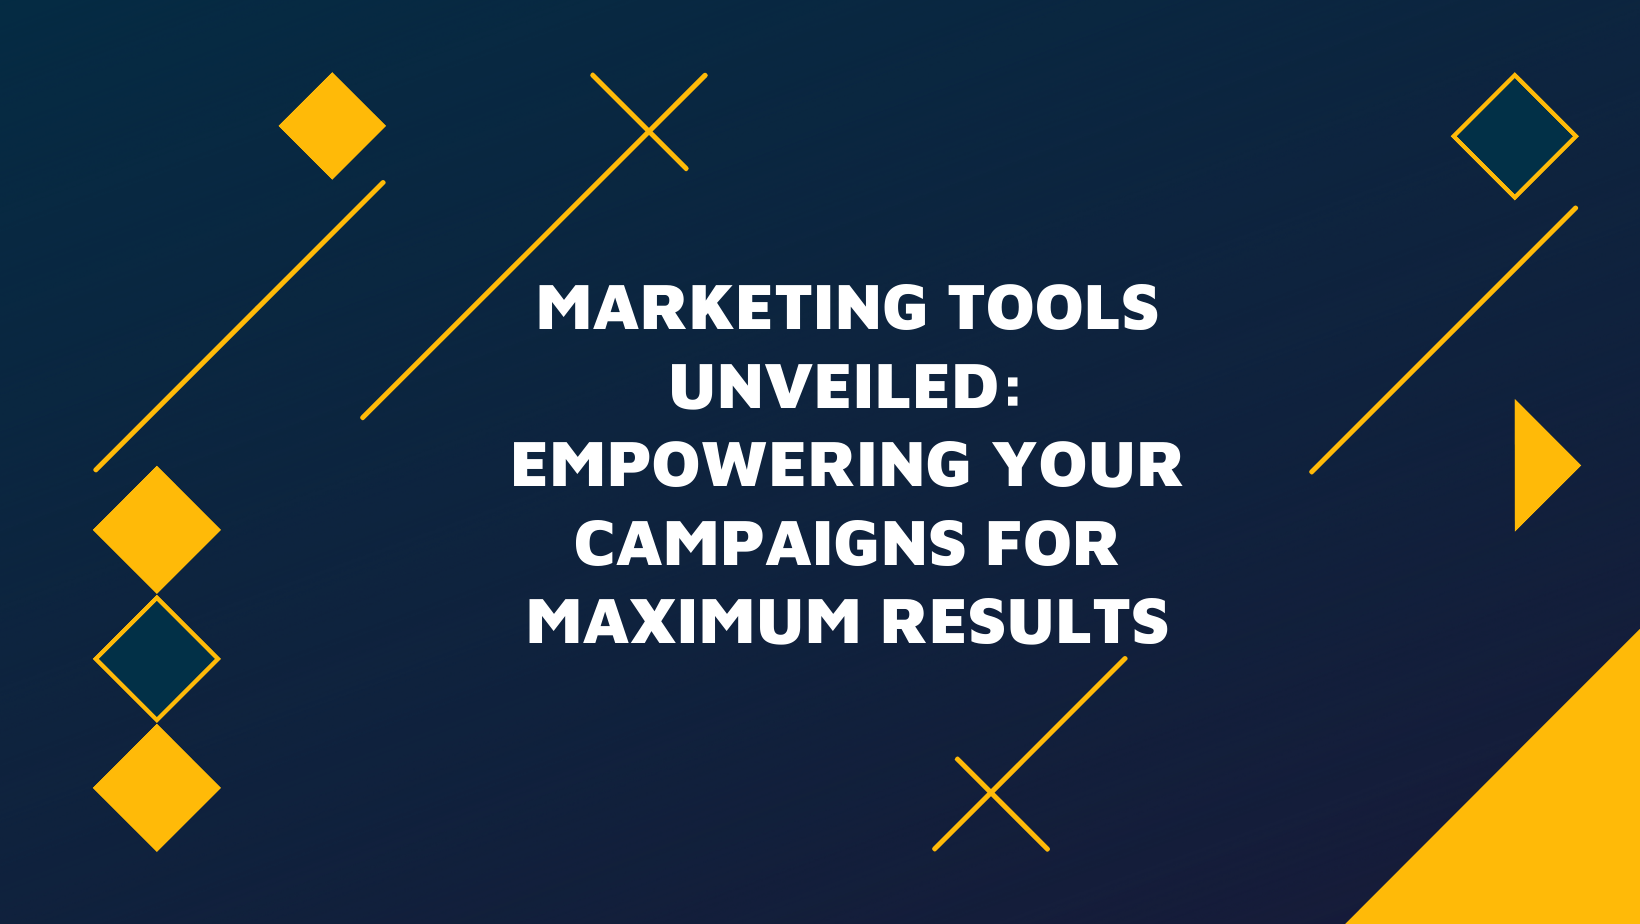 MAAN

MARKETING TOOLS
UNVEILED:
EMPOWERING YOUR
CAMPAIGNS FOR
MAXIMUM RESULTS

rs

4
>